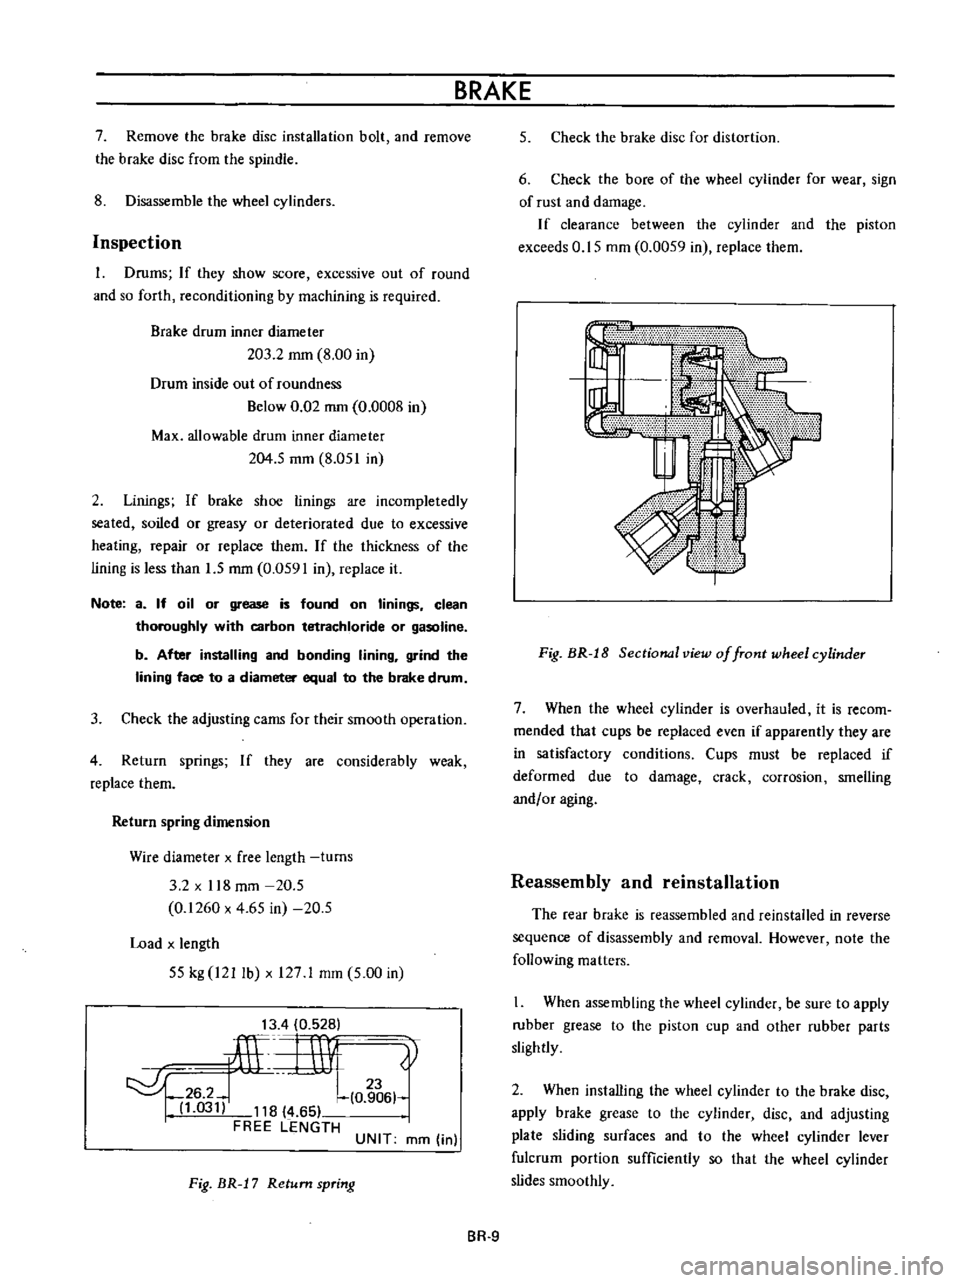 DATSUN B110 1973  Service Owners Manual 
7

Remove 
the

brake 
disc

installation 
bolt 
and 
remove

the 
brake 
disc 
from 
the

spindle

8 
Disassemble

the 
wheel

cylinders

Inspection

l 
Drums

If

they 
show

score 
excessive 
out 